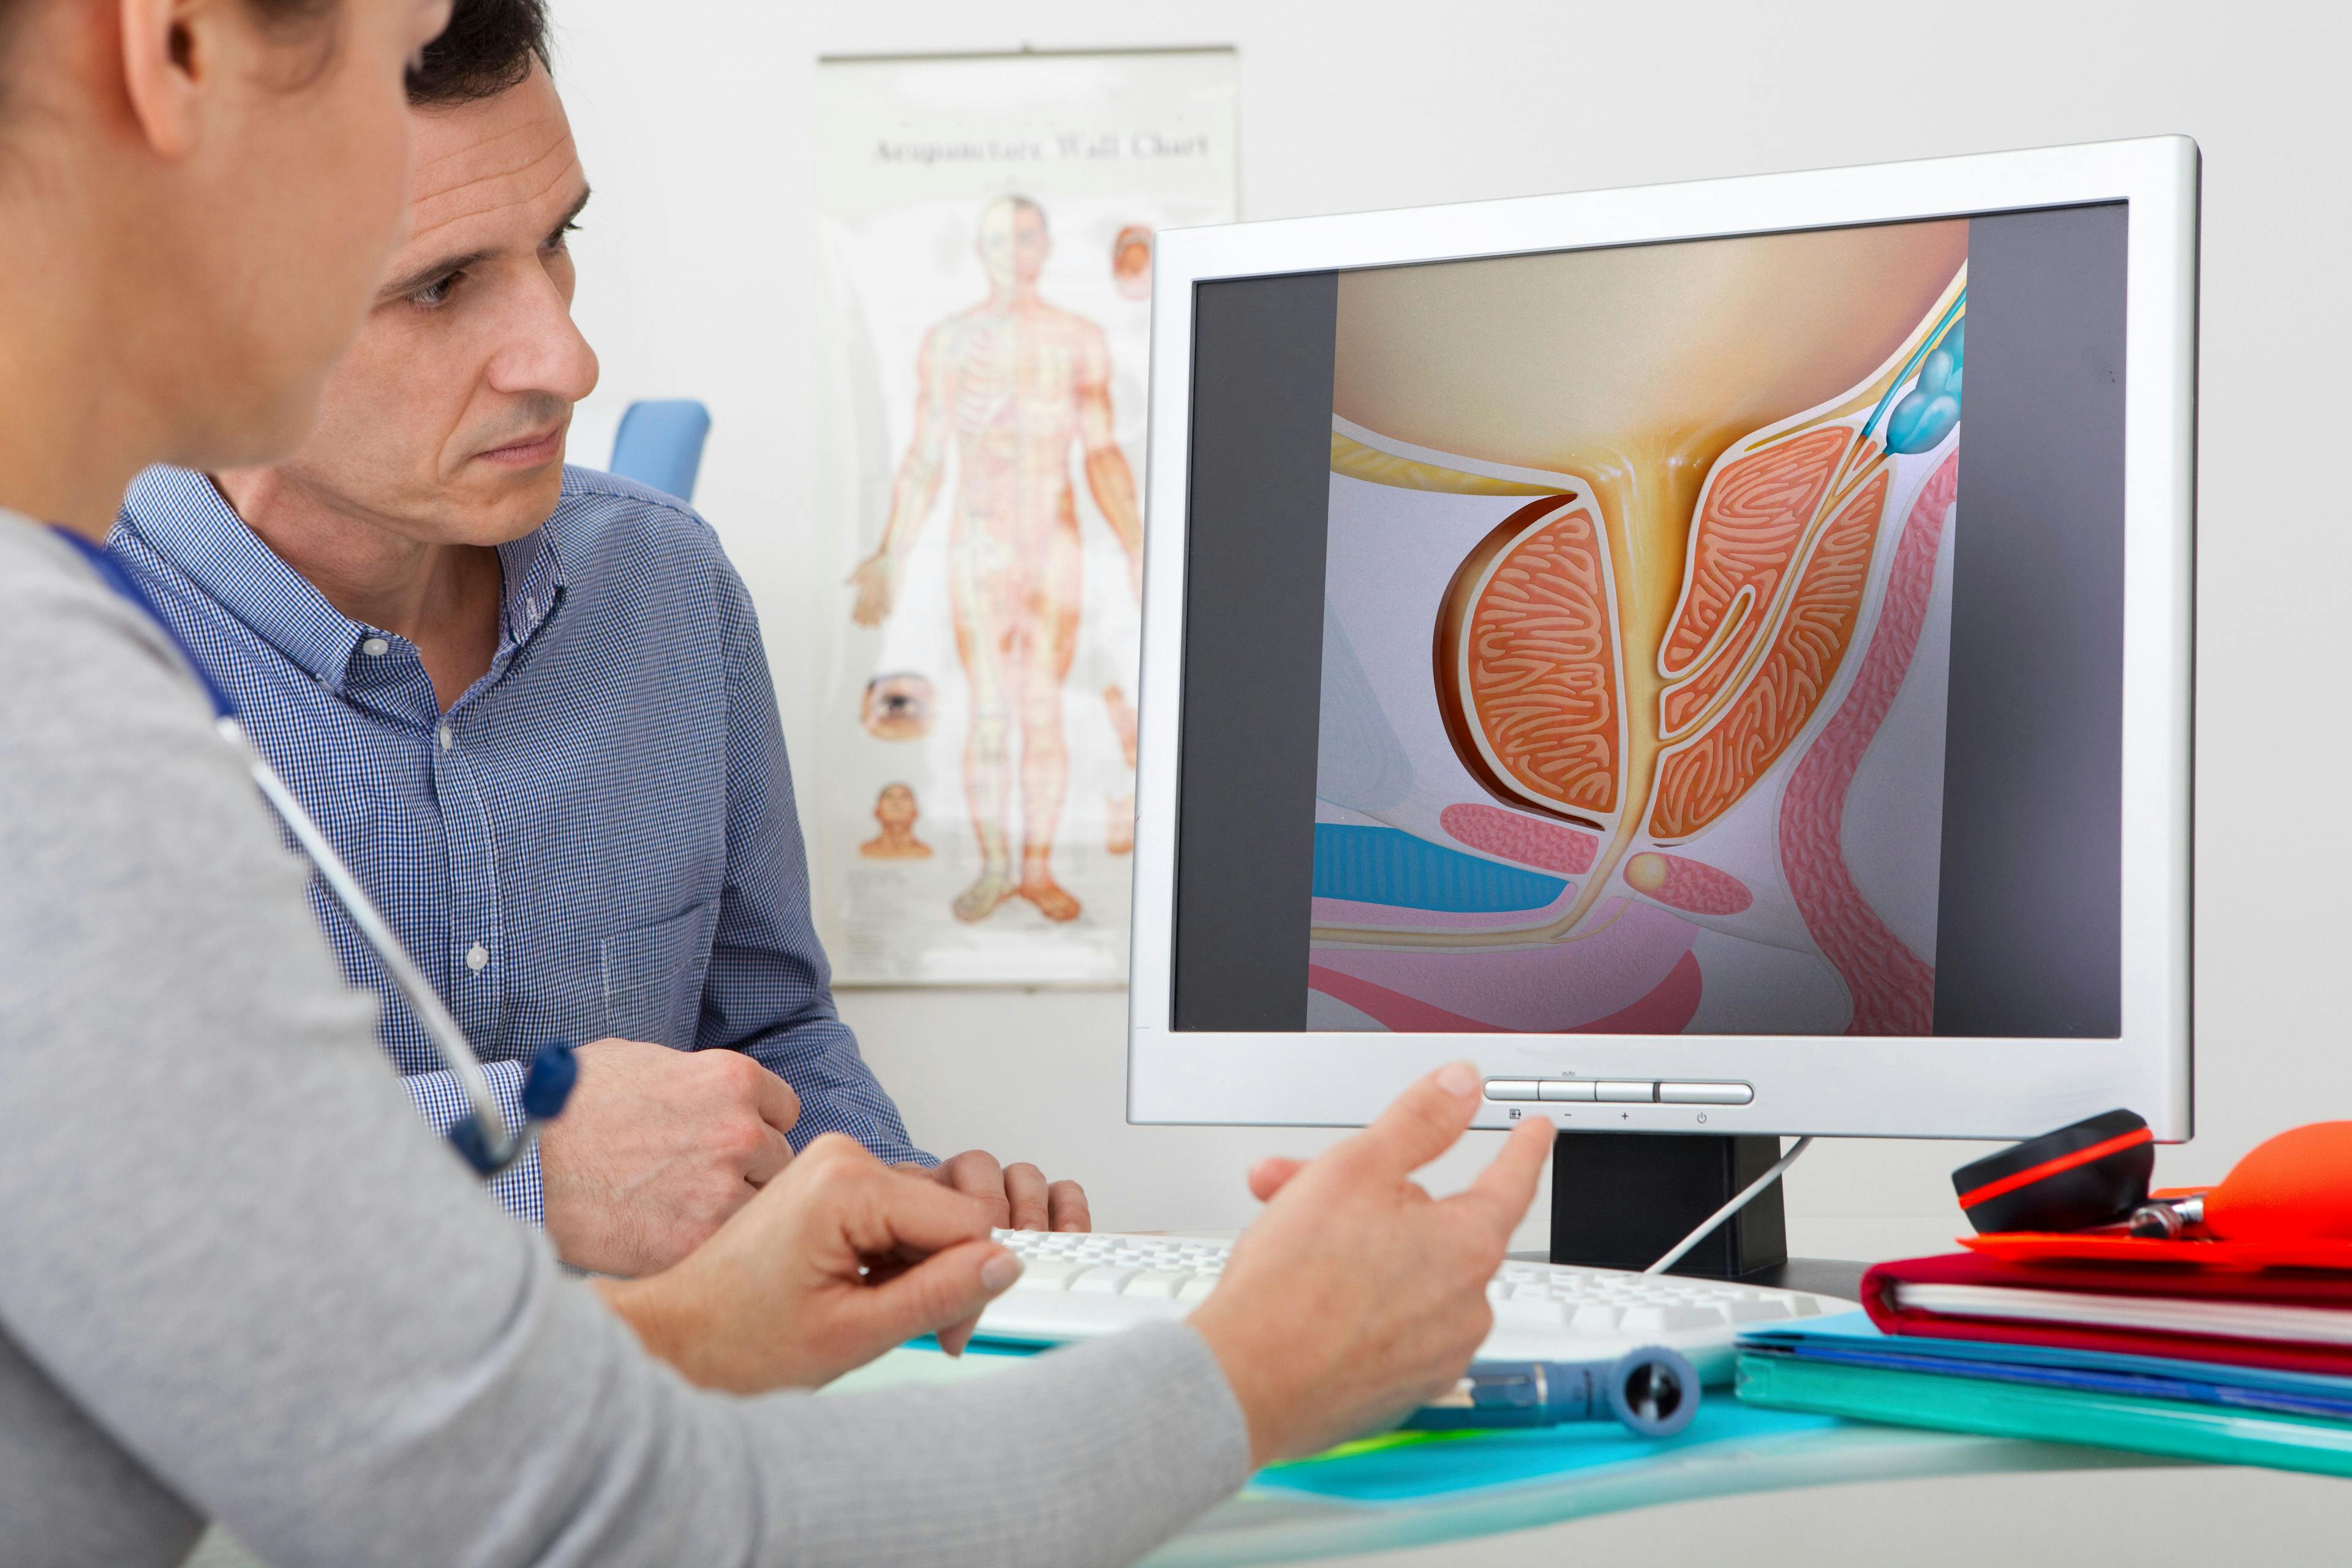 Models On screen, drawing illustrating the prostate (without pathology) | Image credit: © RFBSIB - © stock.adobe.com